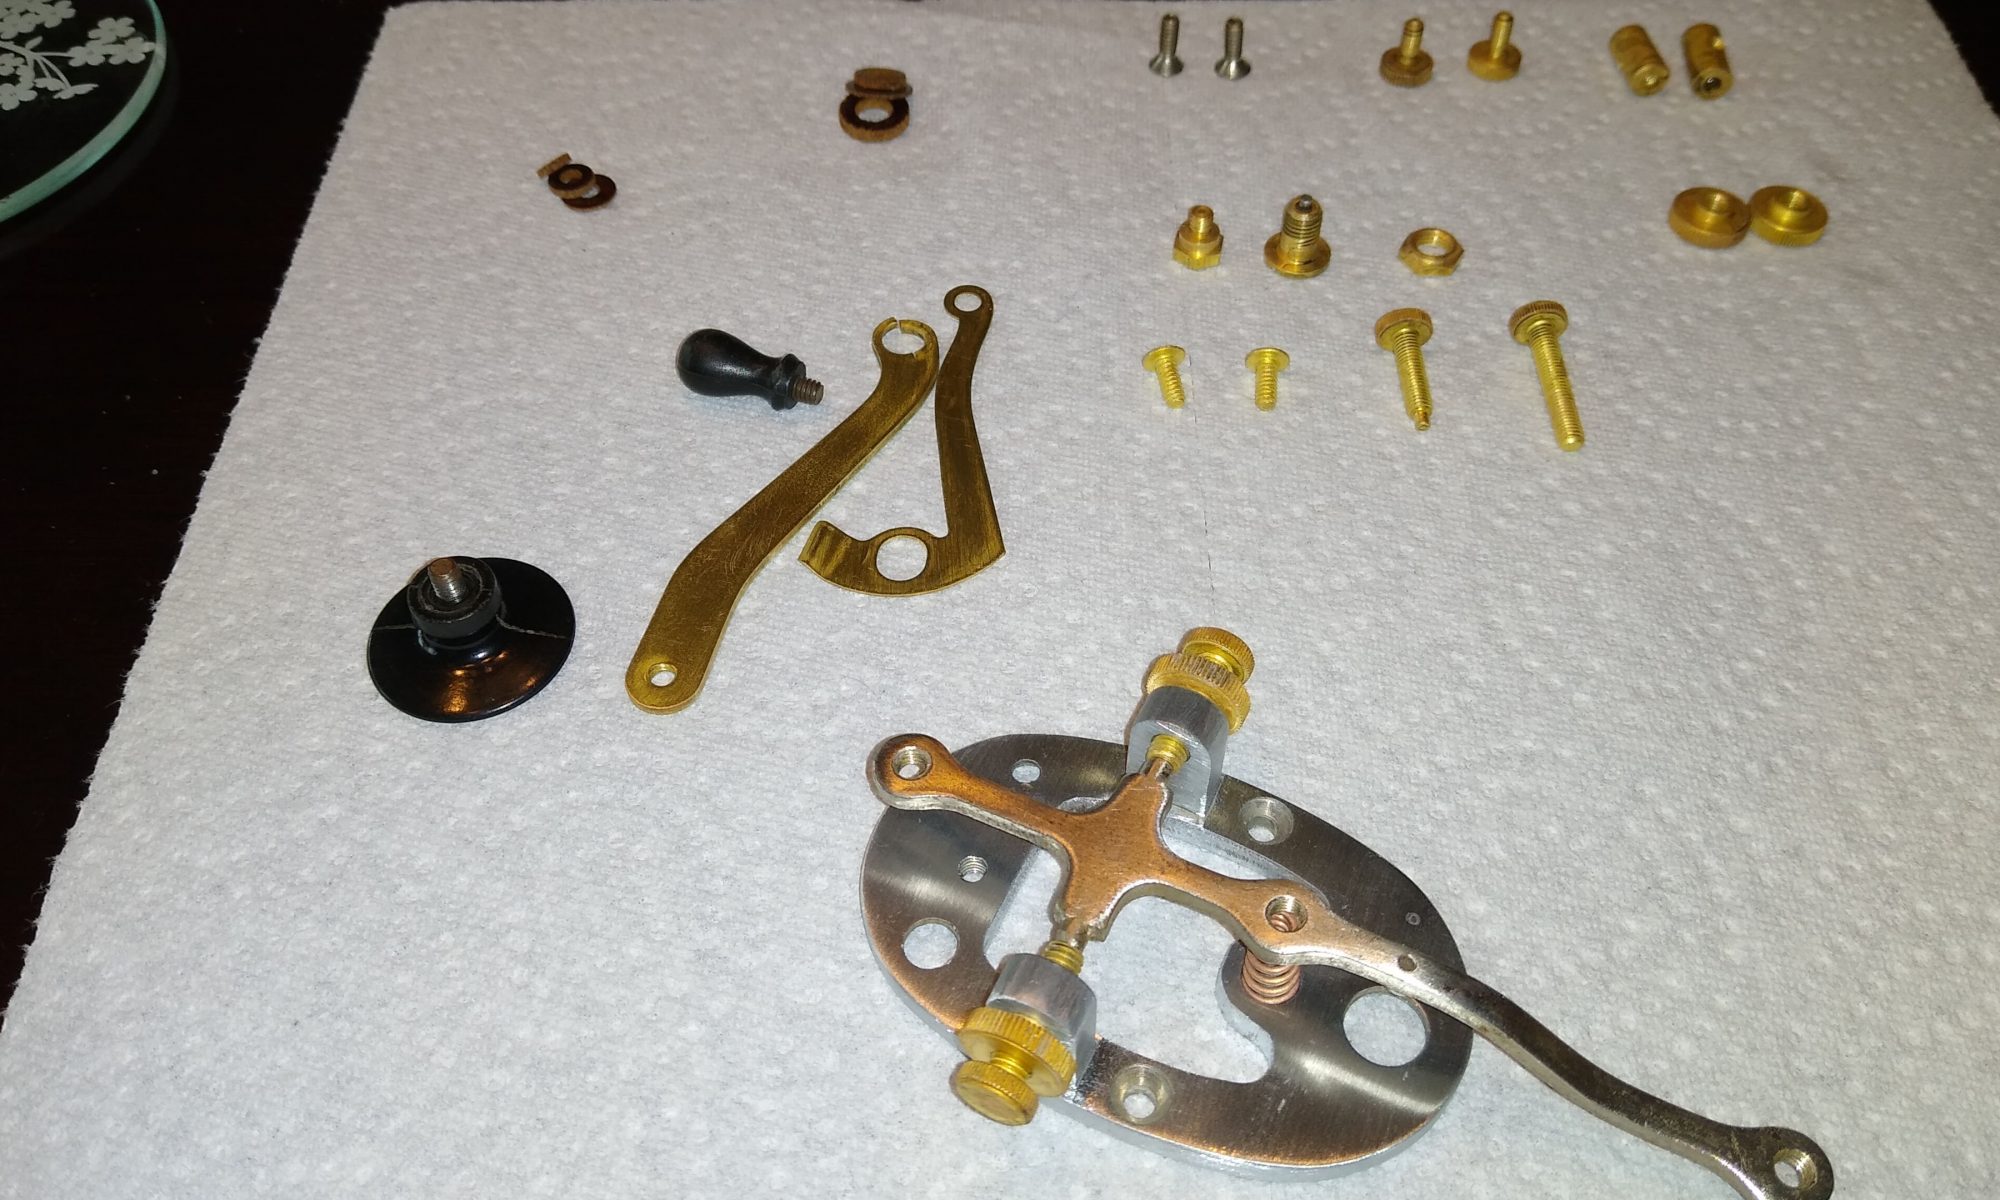 J-38 Morse code key after disassembly and cleaning